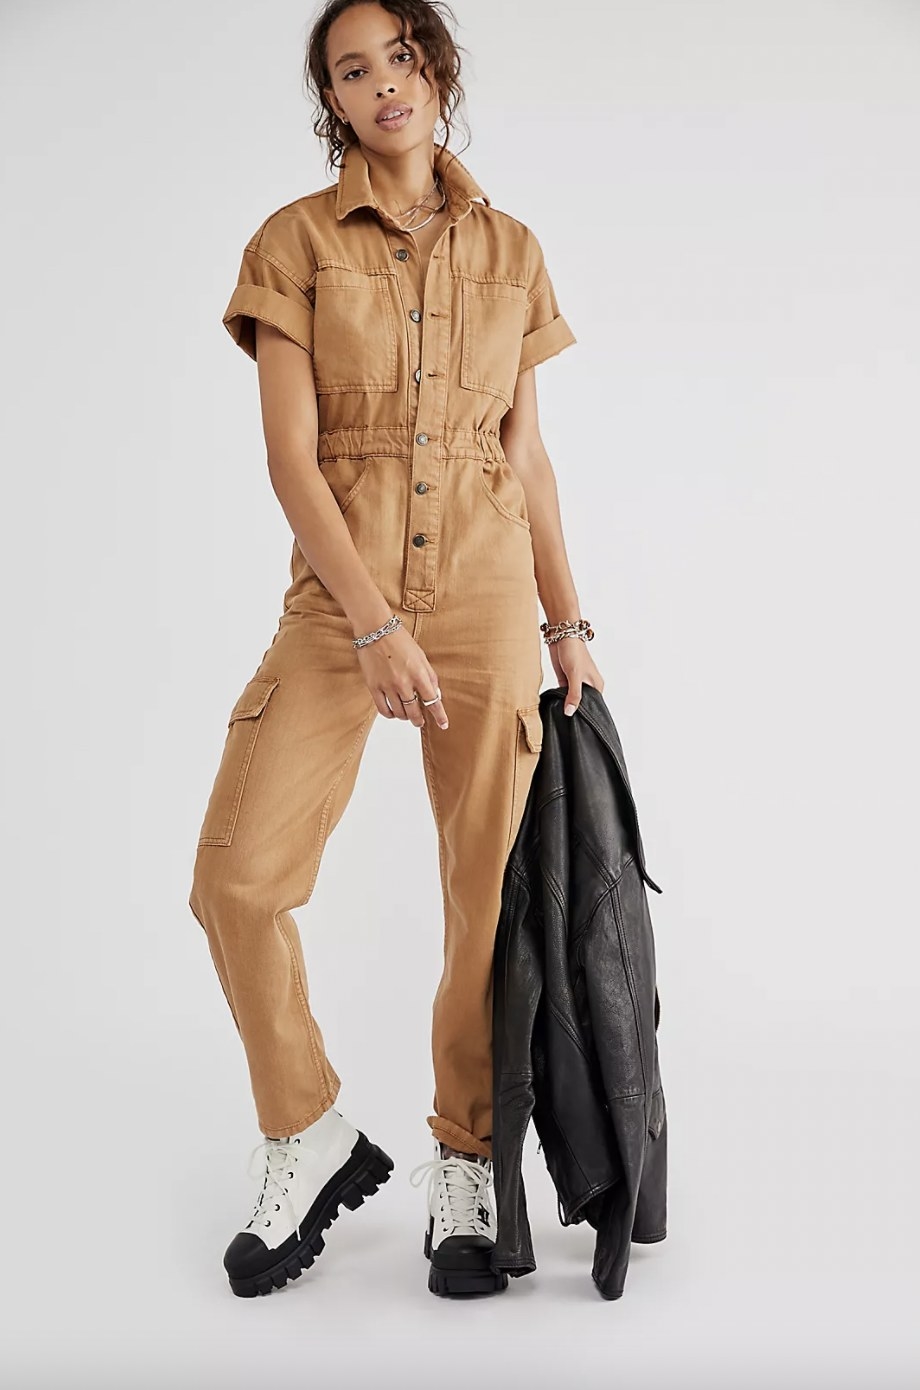 Model wearing tan coverall